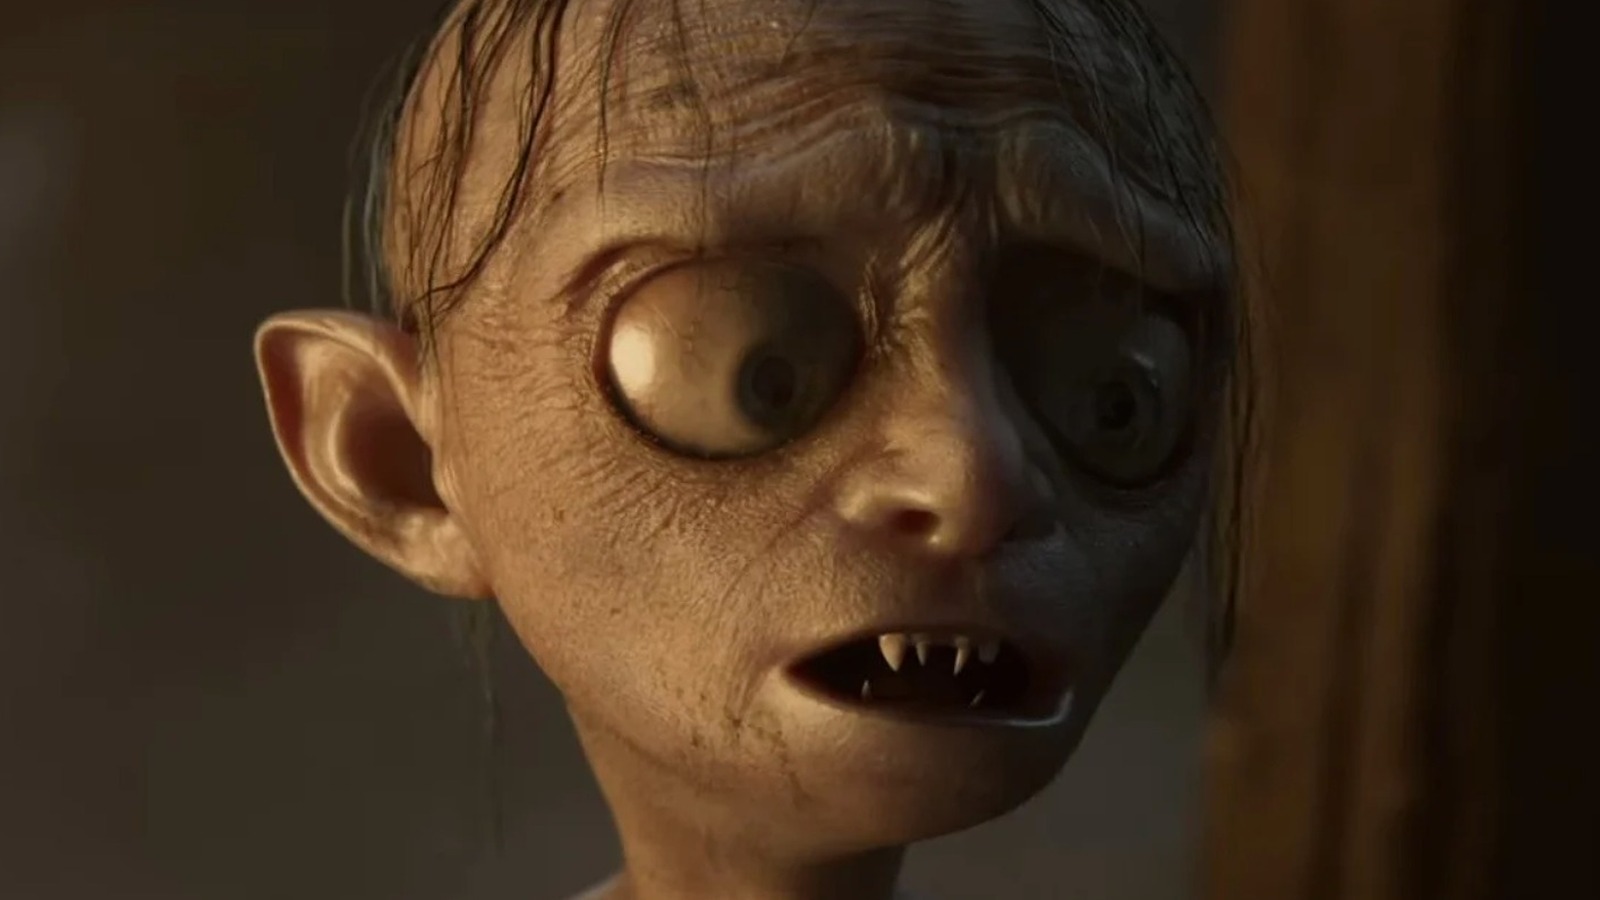 The Lord of the Rings: Gollum Developer Daedalic Is Making Another